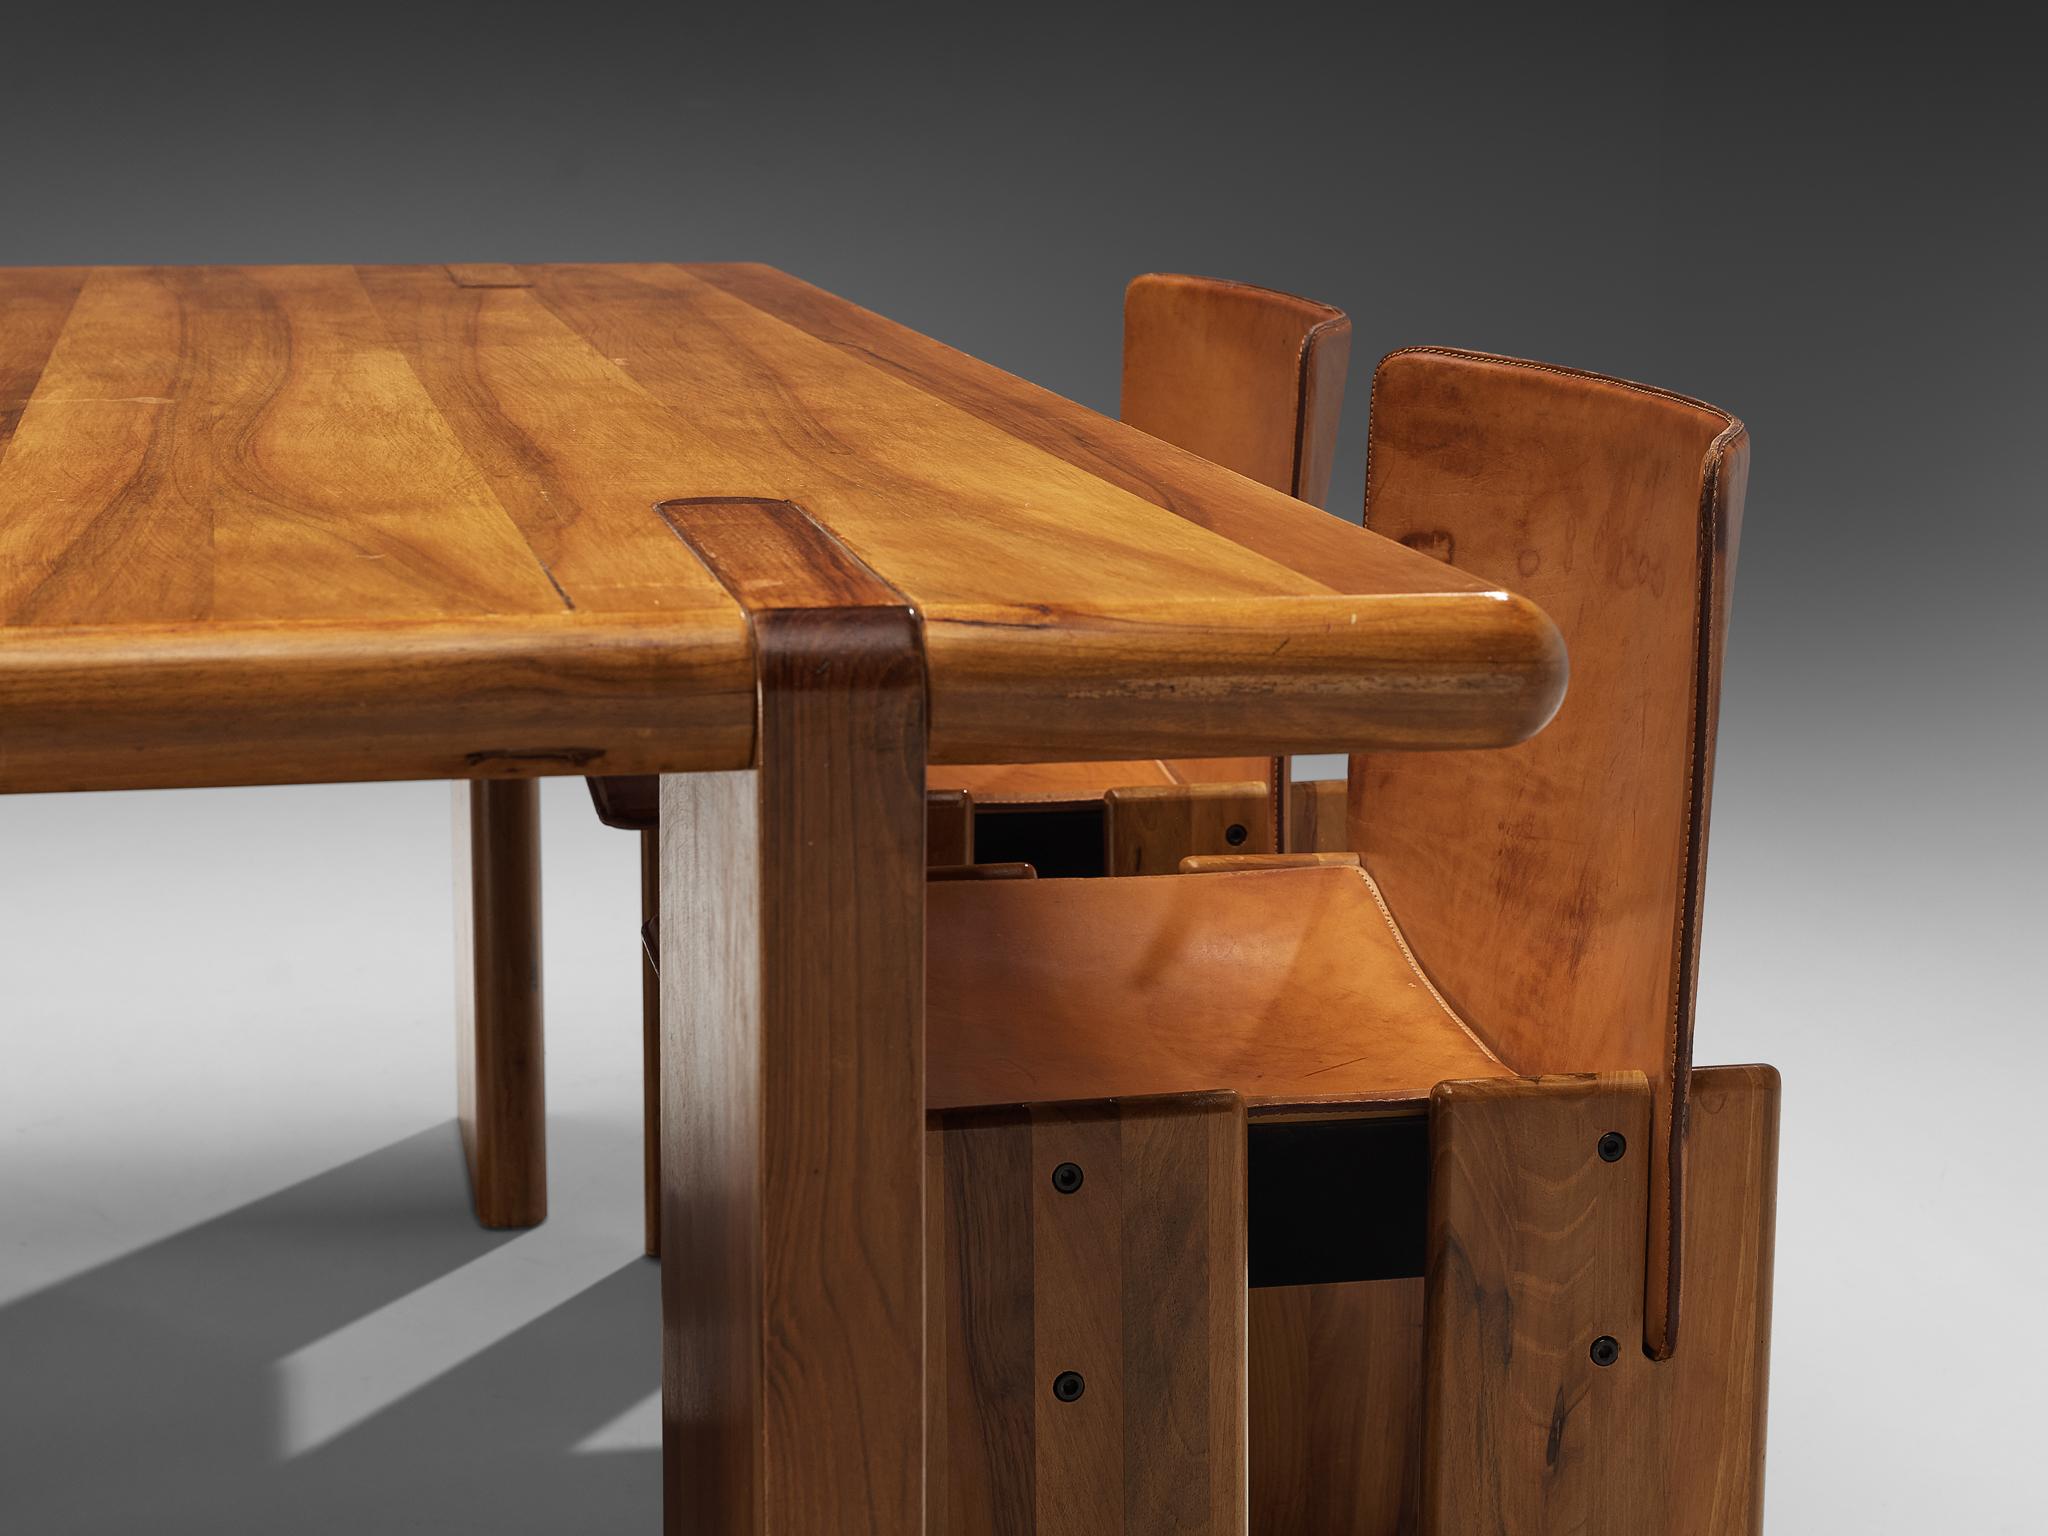 Late 20th Century Barsacchi & Vegni Dining Table in Walnut with Dining Chairs in Cognac Leather